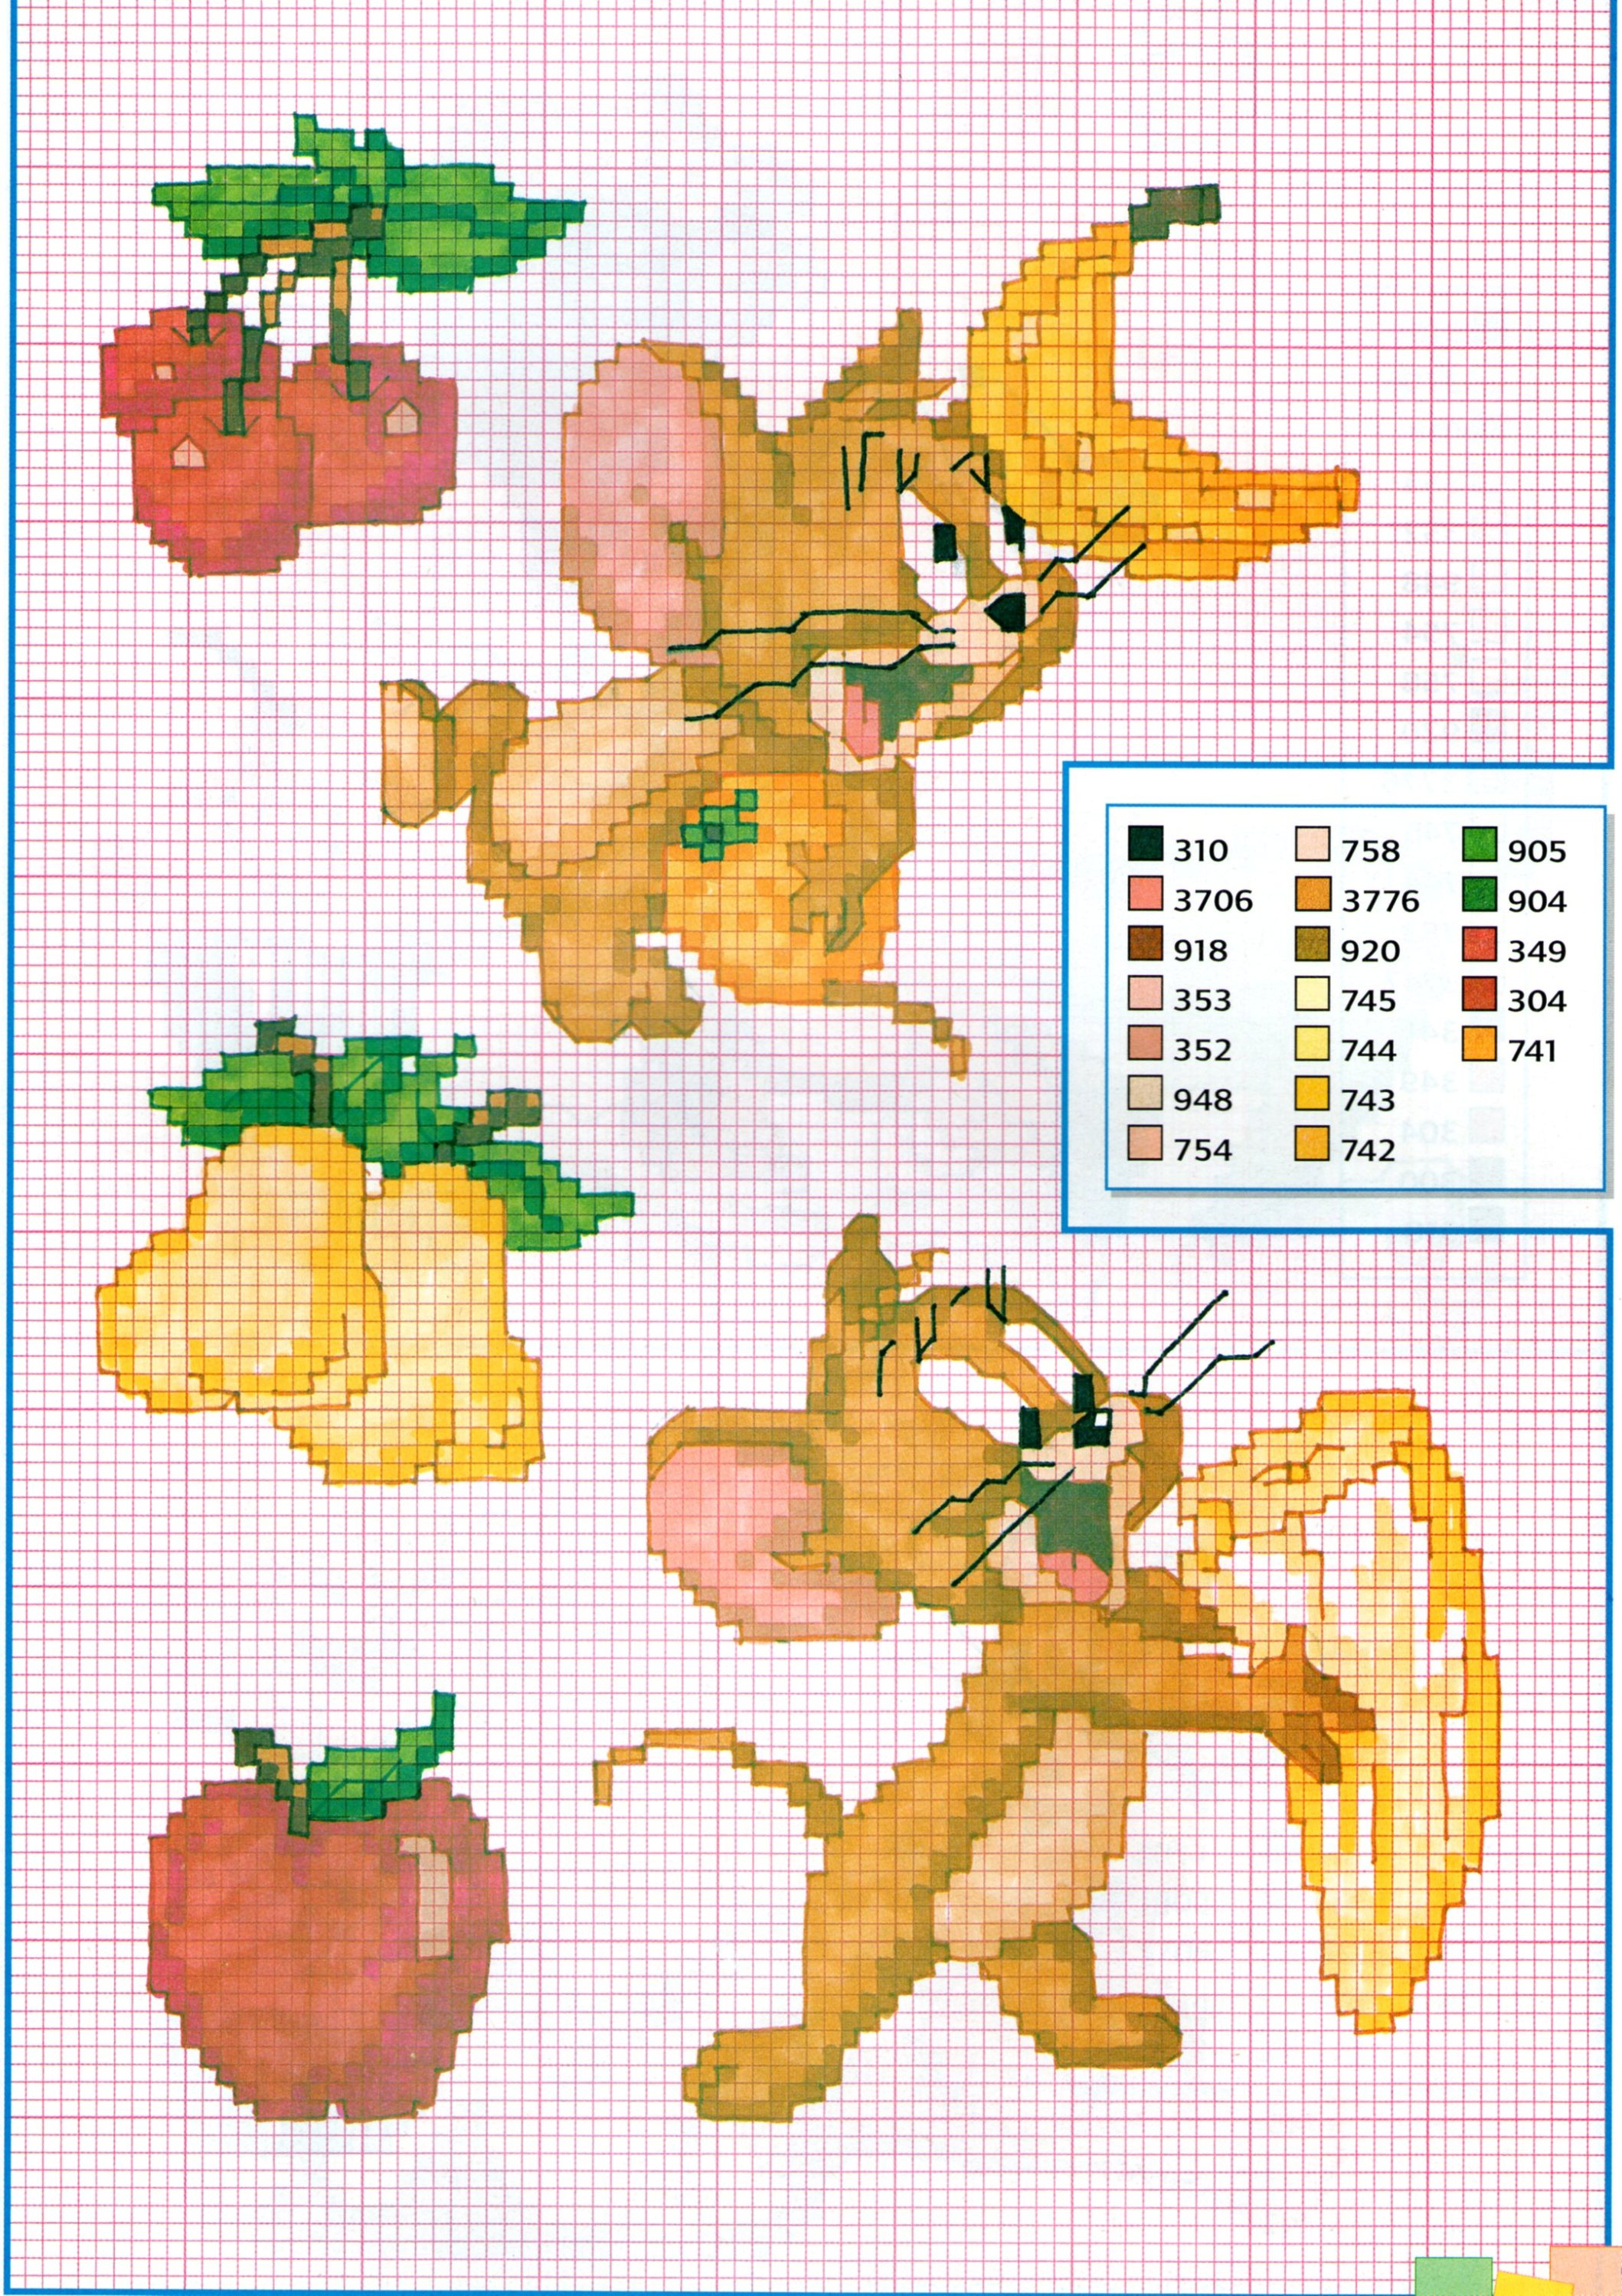 The mouse Jerry plays with fruit